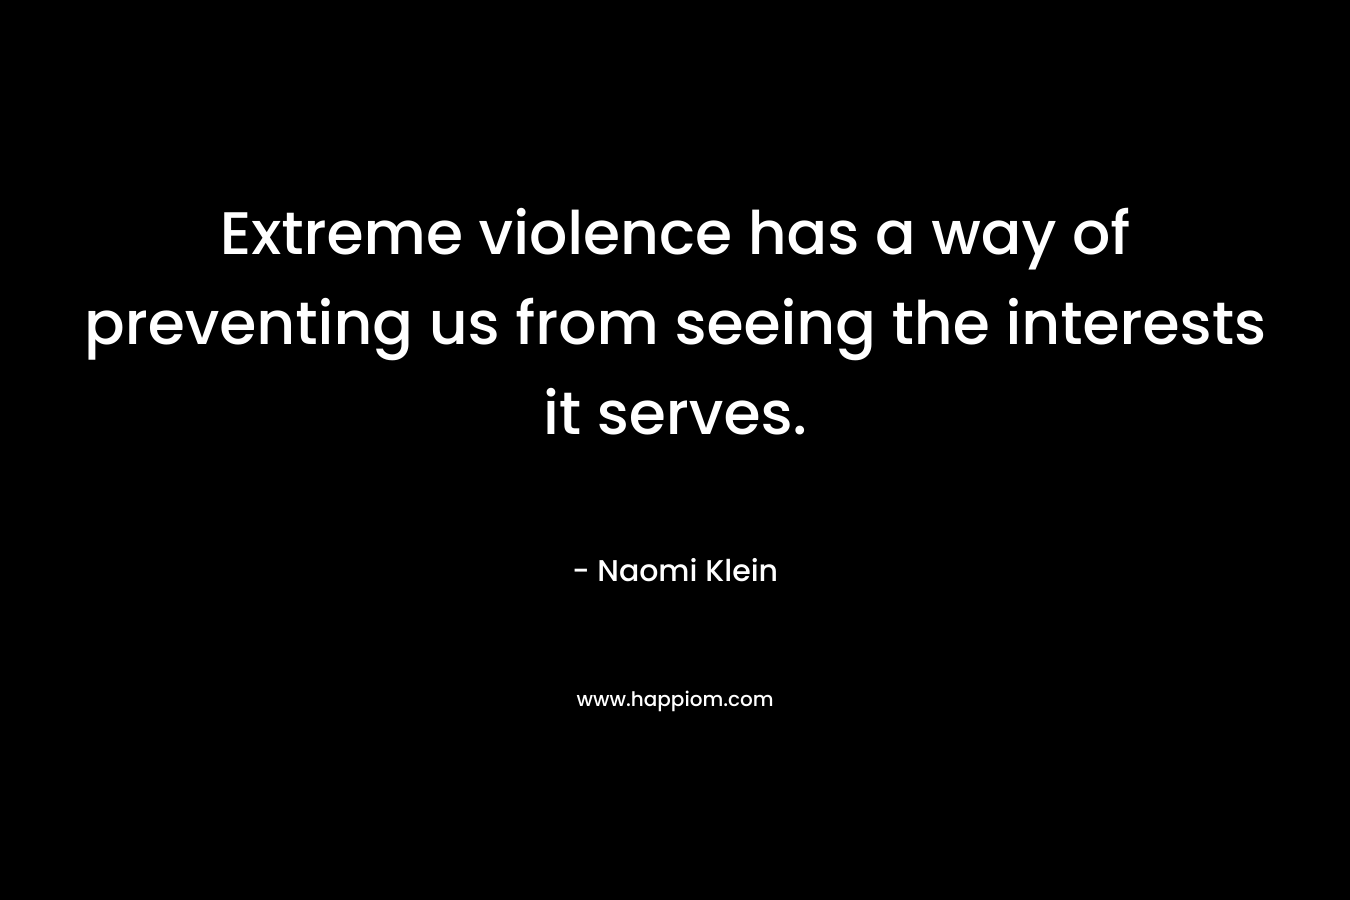 Extreme violence has a way of preventing us from seeing the interests it serves.